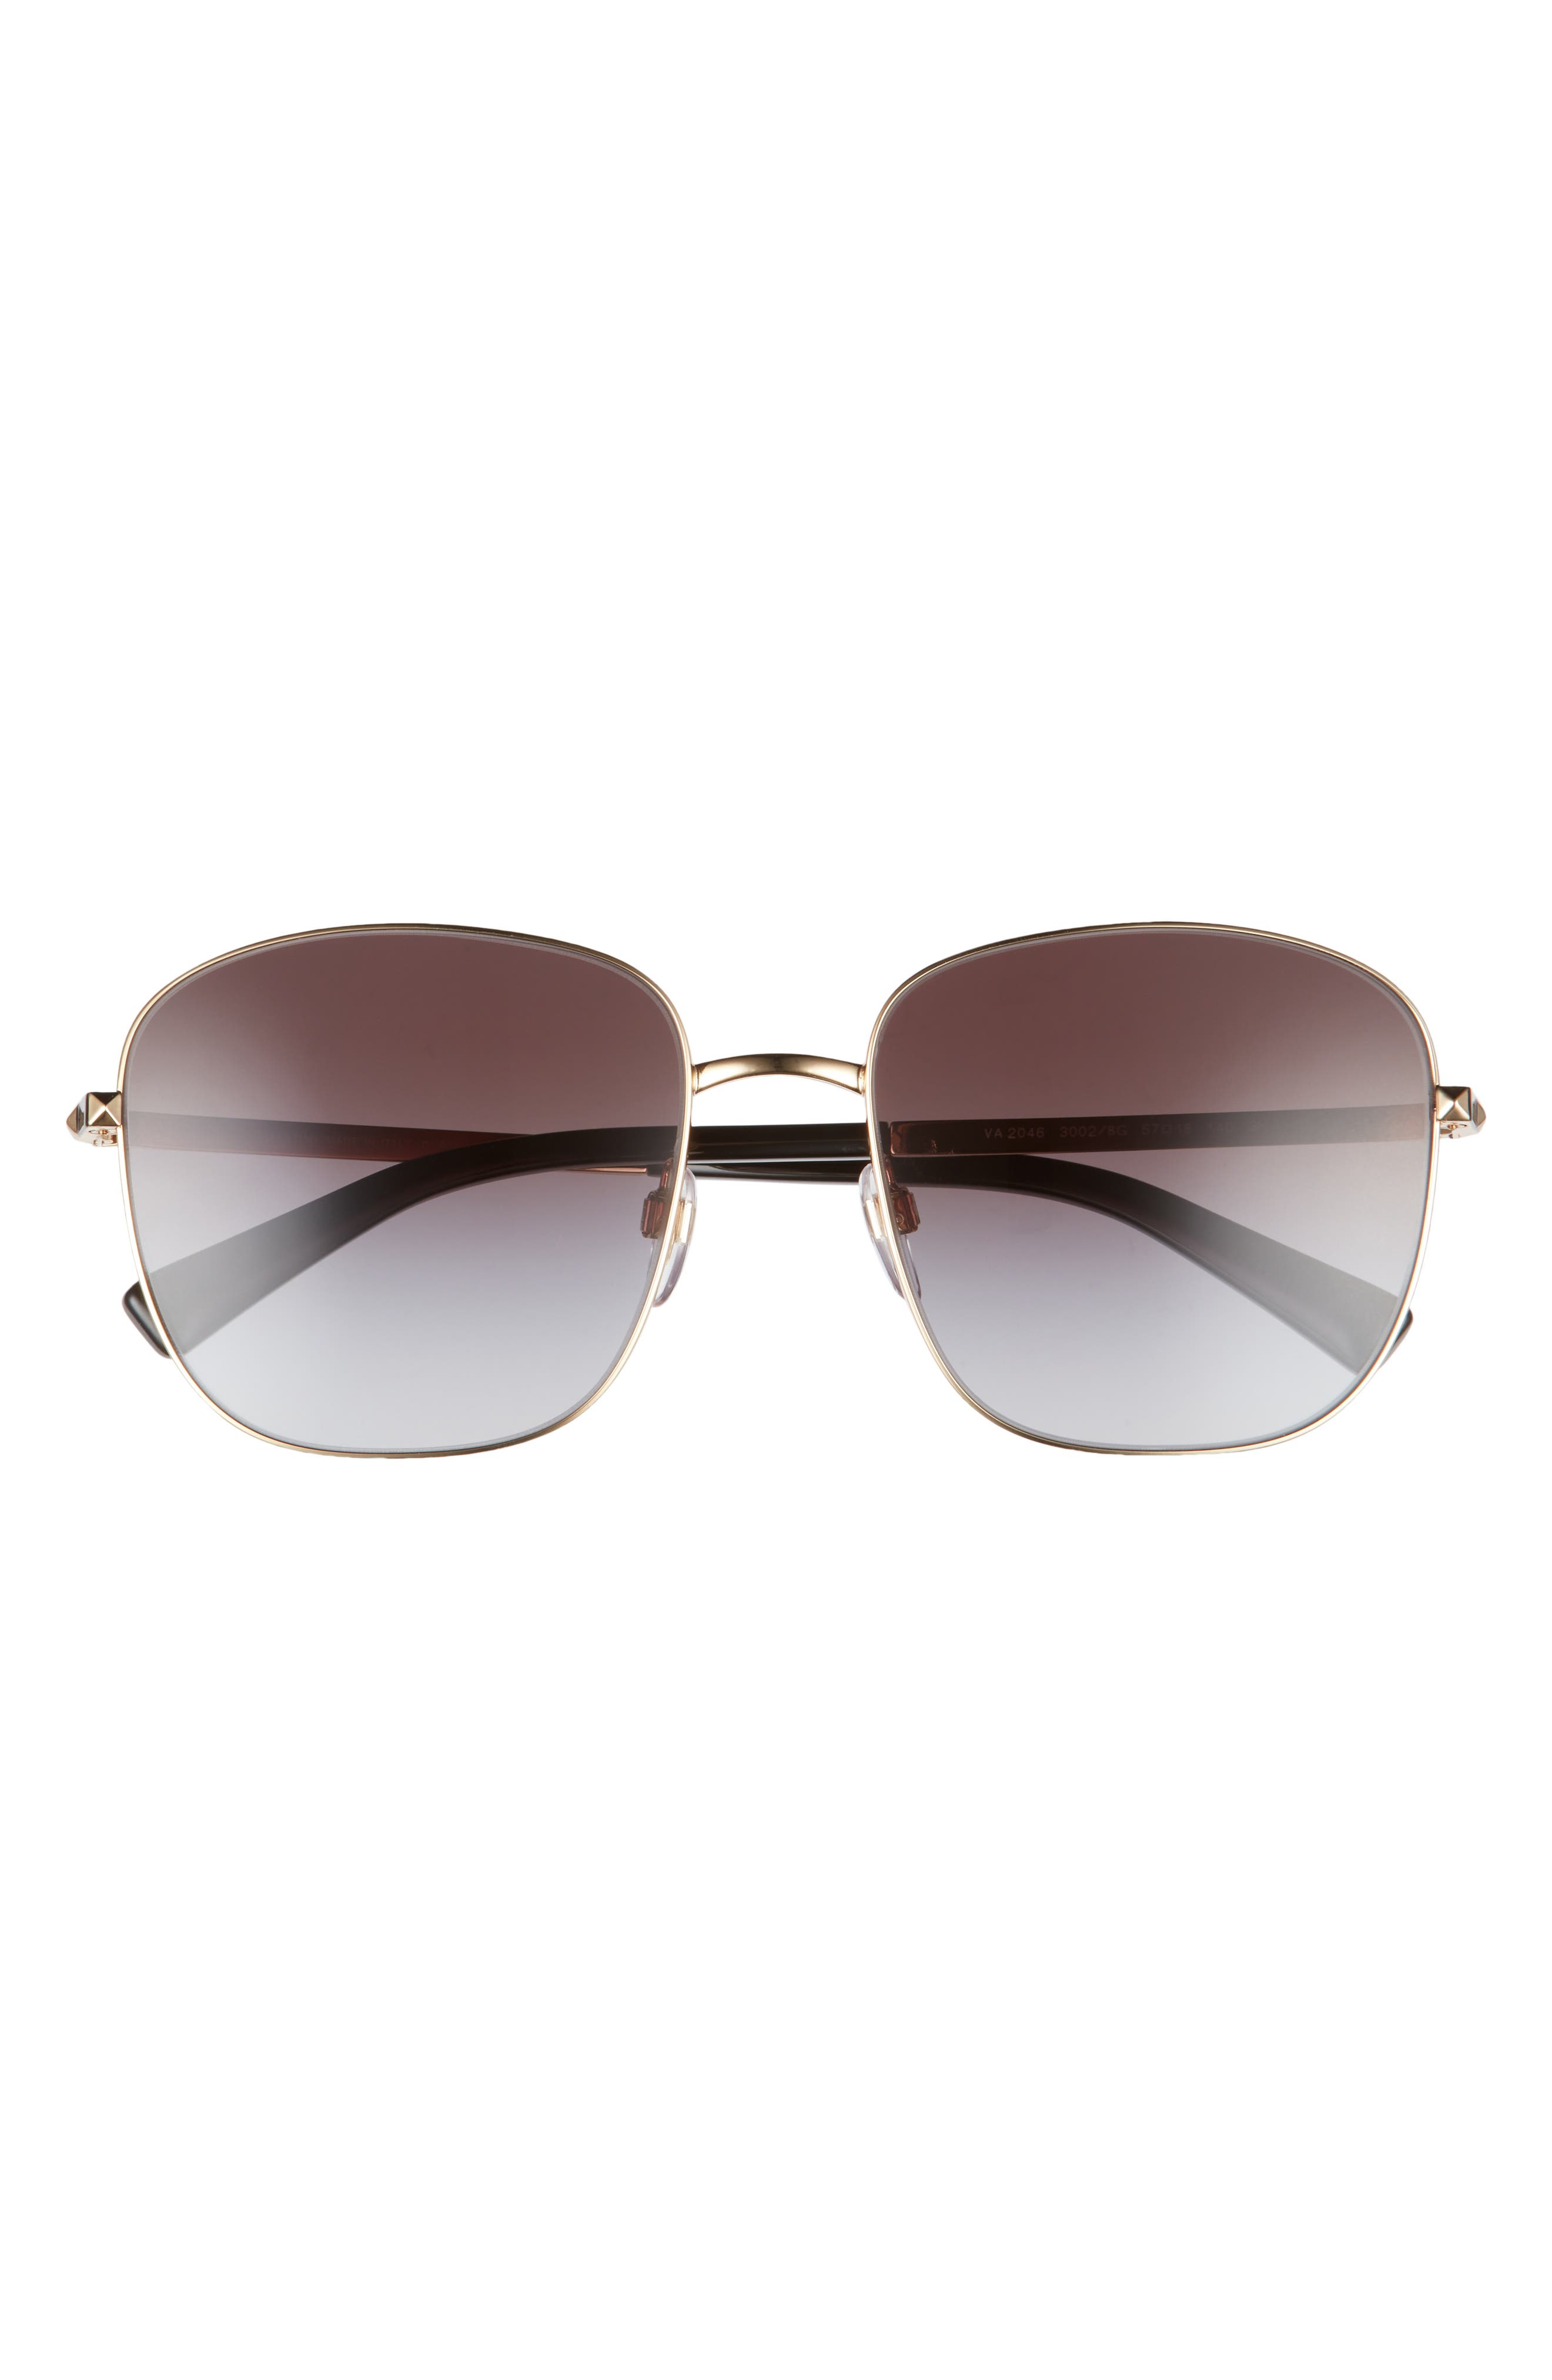 Valentino 57mm Studded Sunglasses in Gold/Gradient Black at Nordstrom